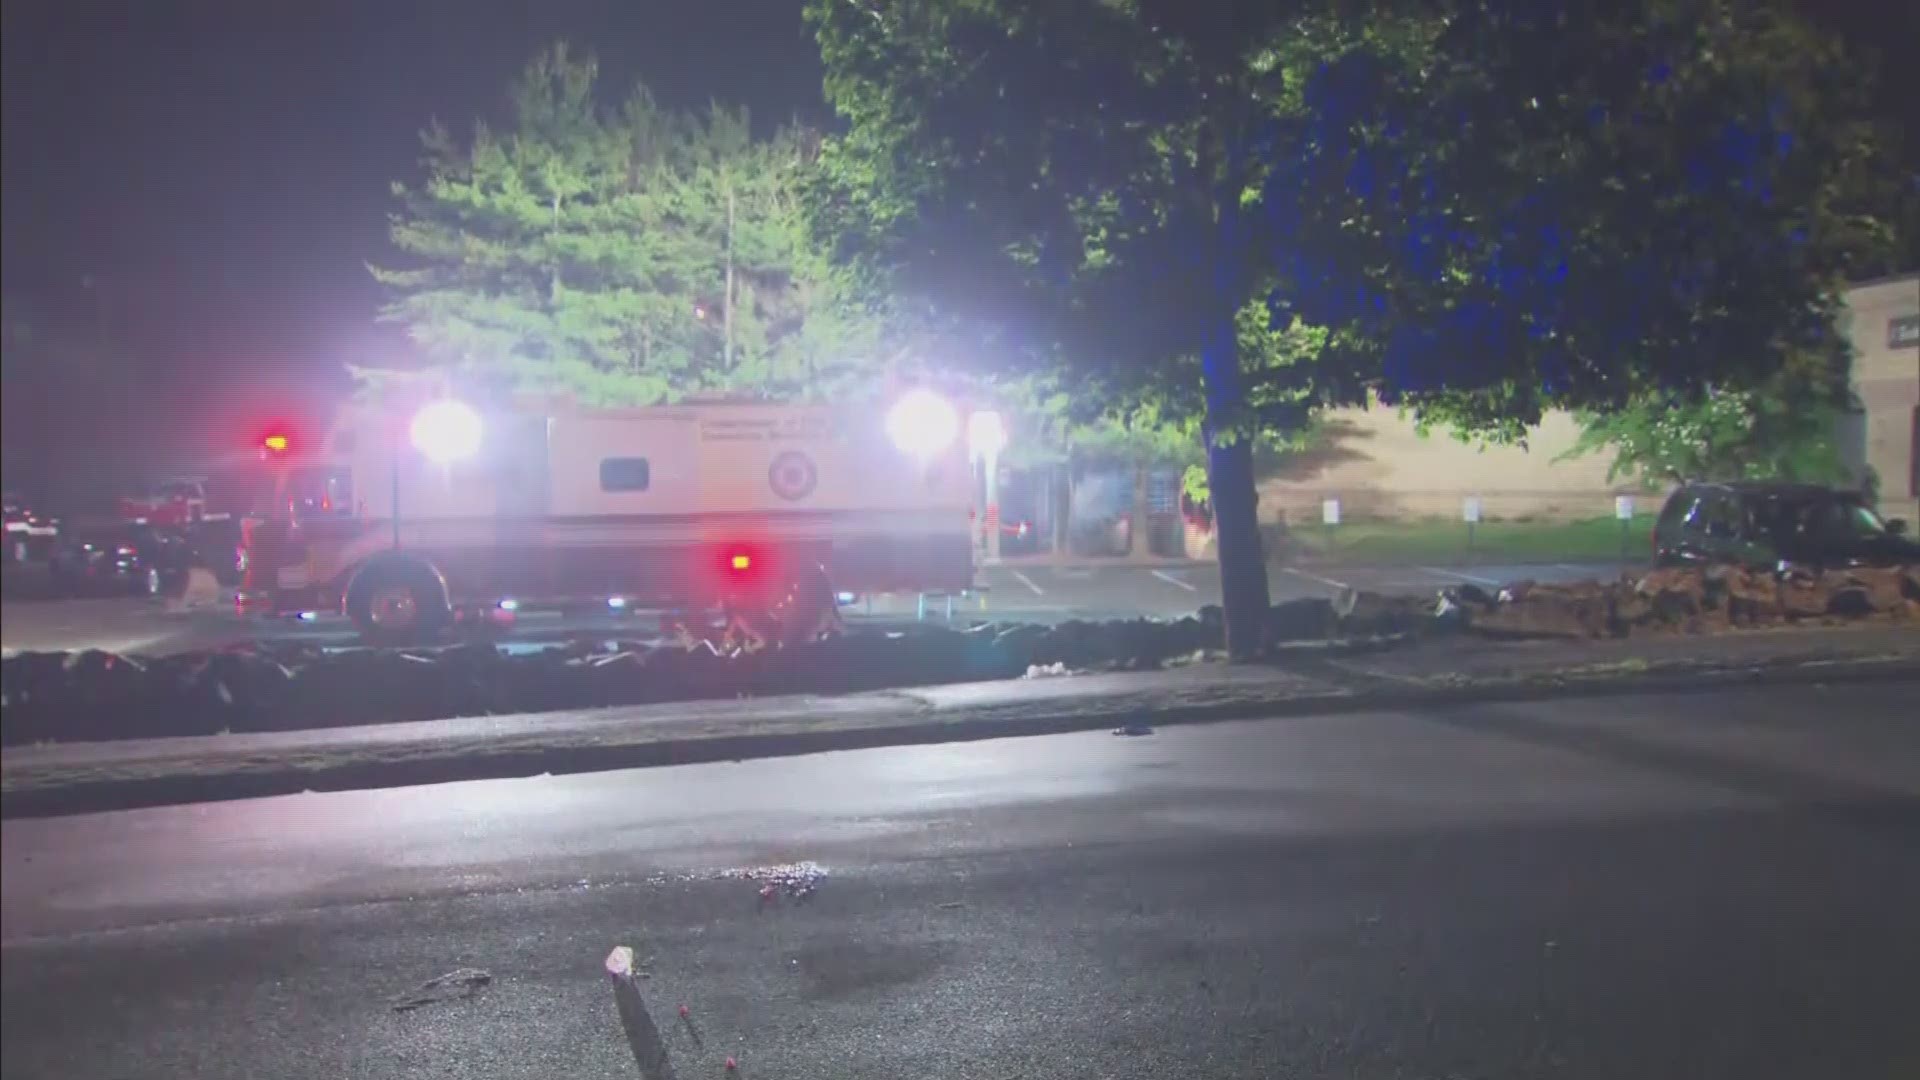 An official at Salem Hospital told CBS Boston early Monday morning that 20 people were being treated for unspecified illness related to the incident.